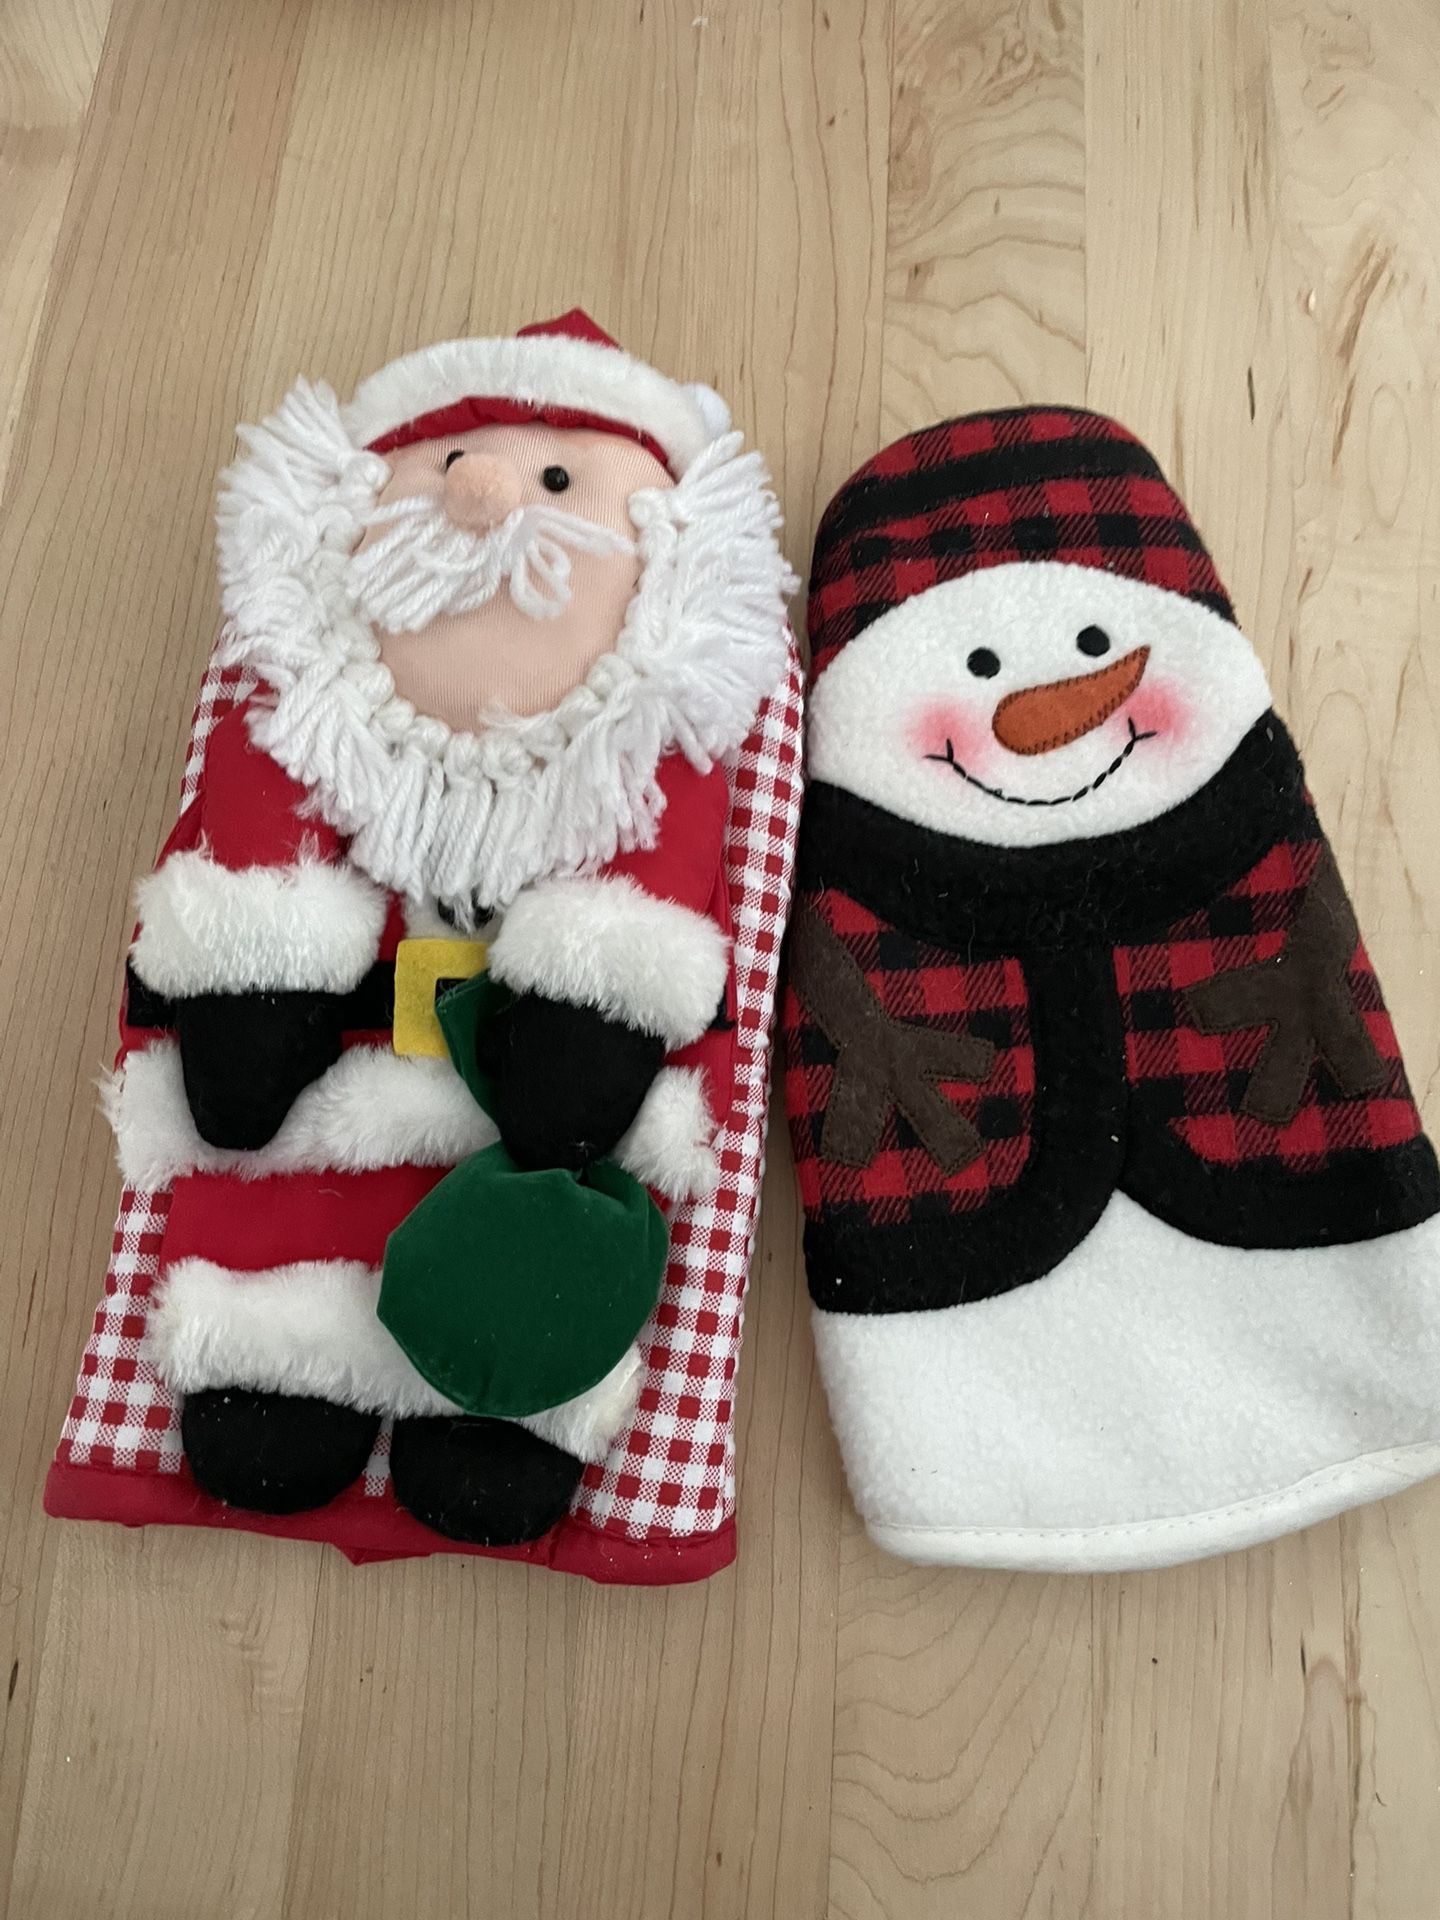 Holiday Oven Mitts